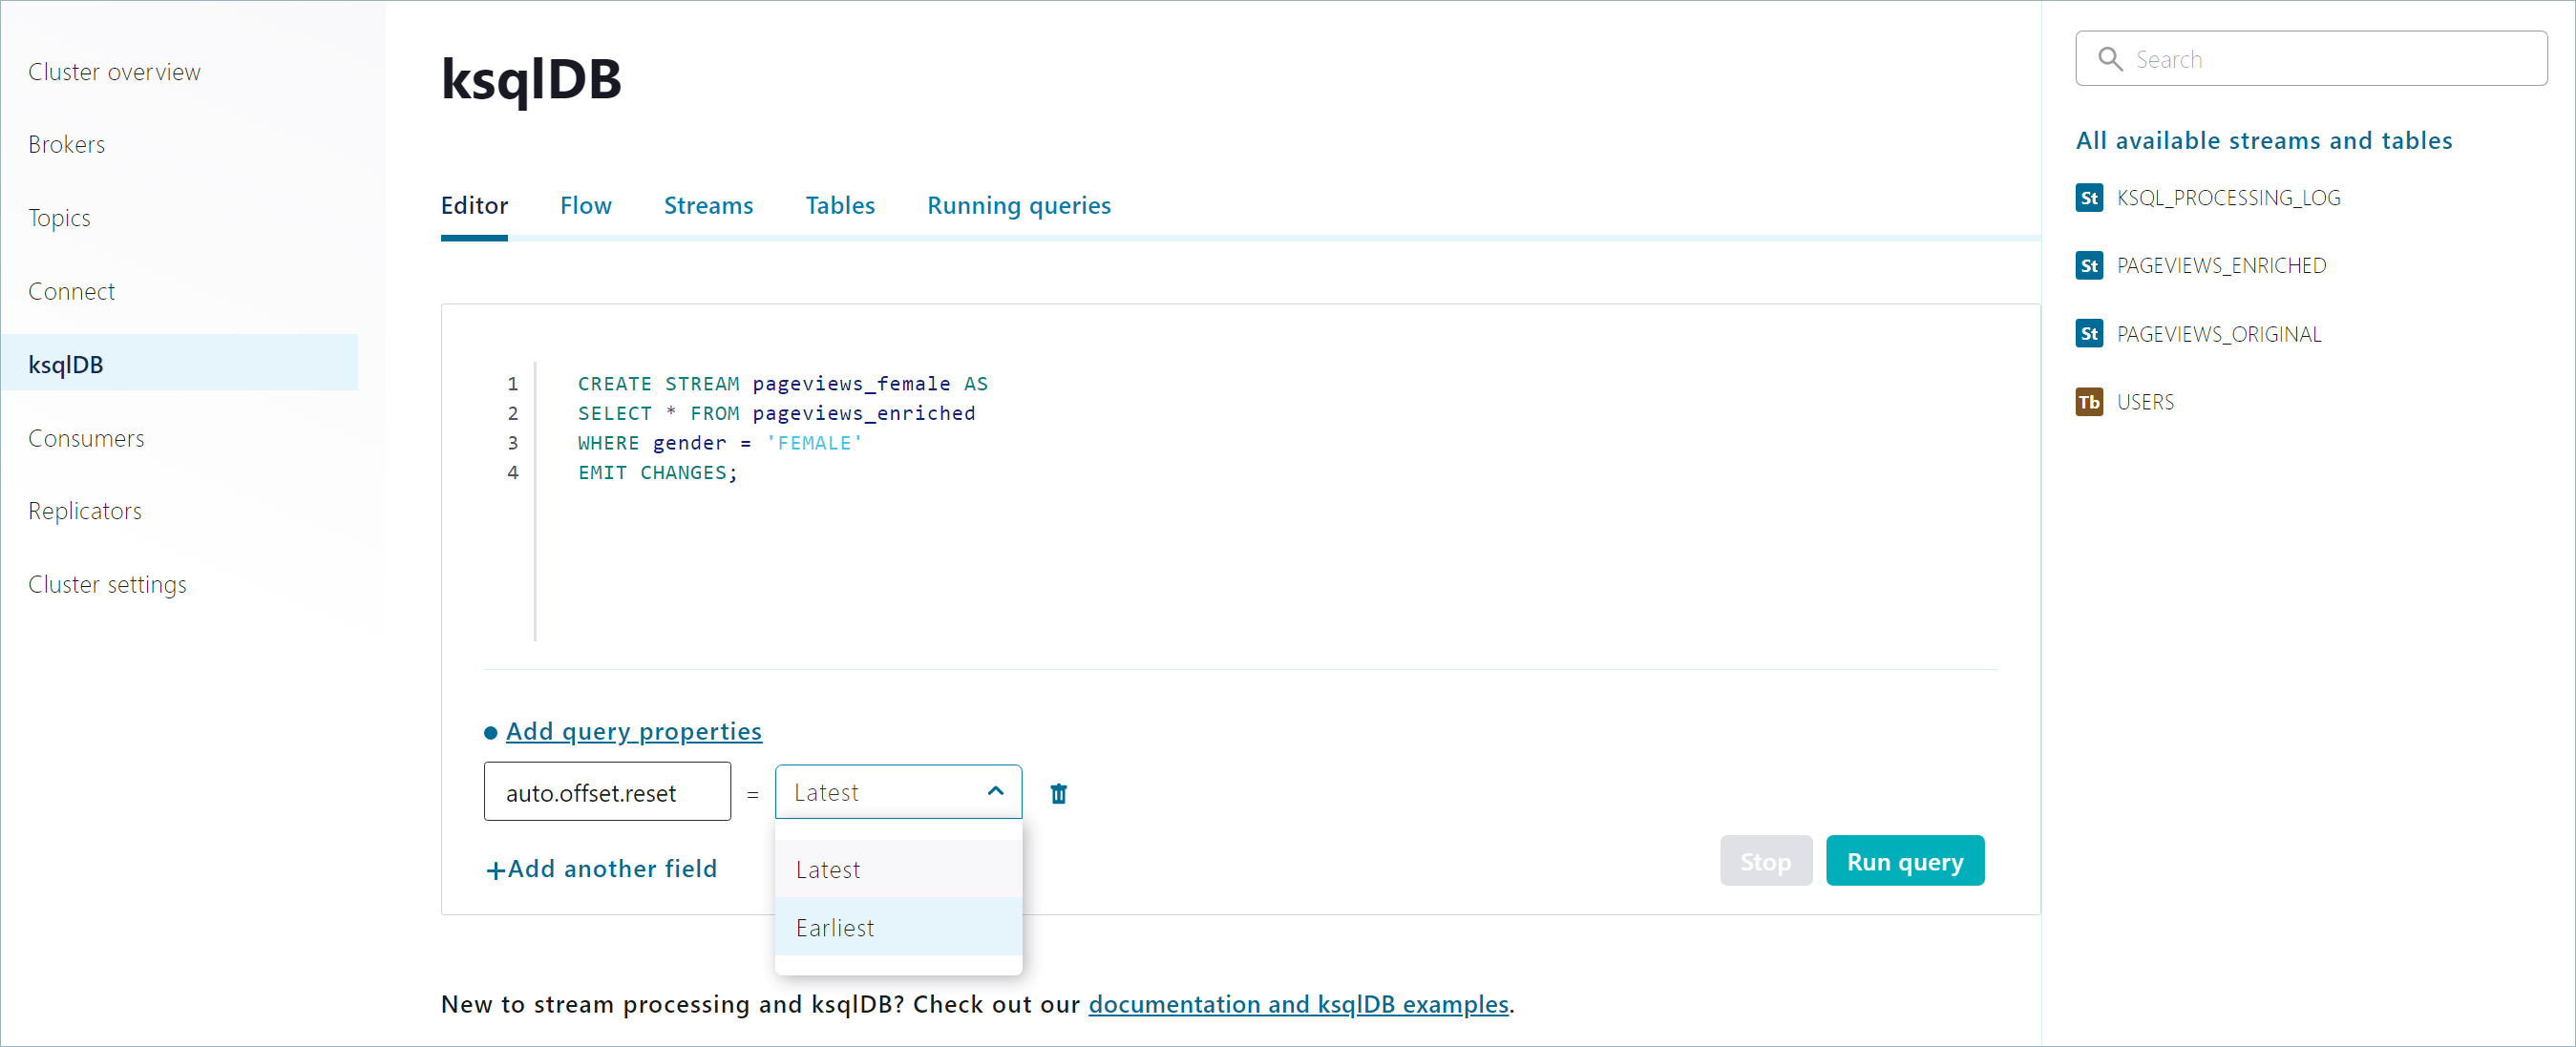 Screenshot showing how to set a query property in the ksqlDB Editor page